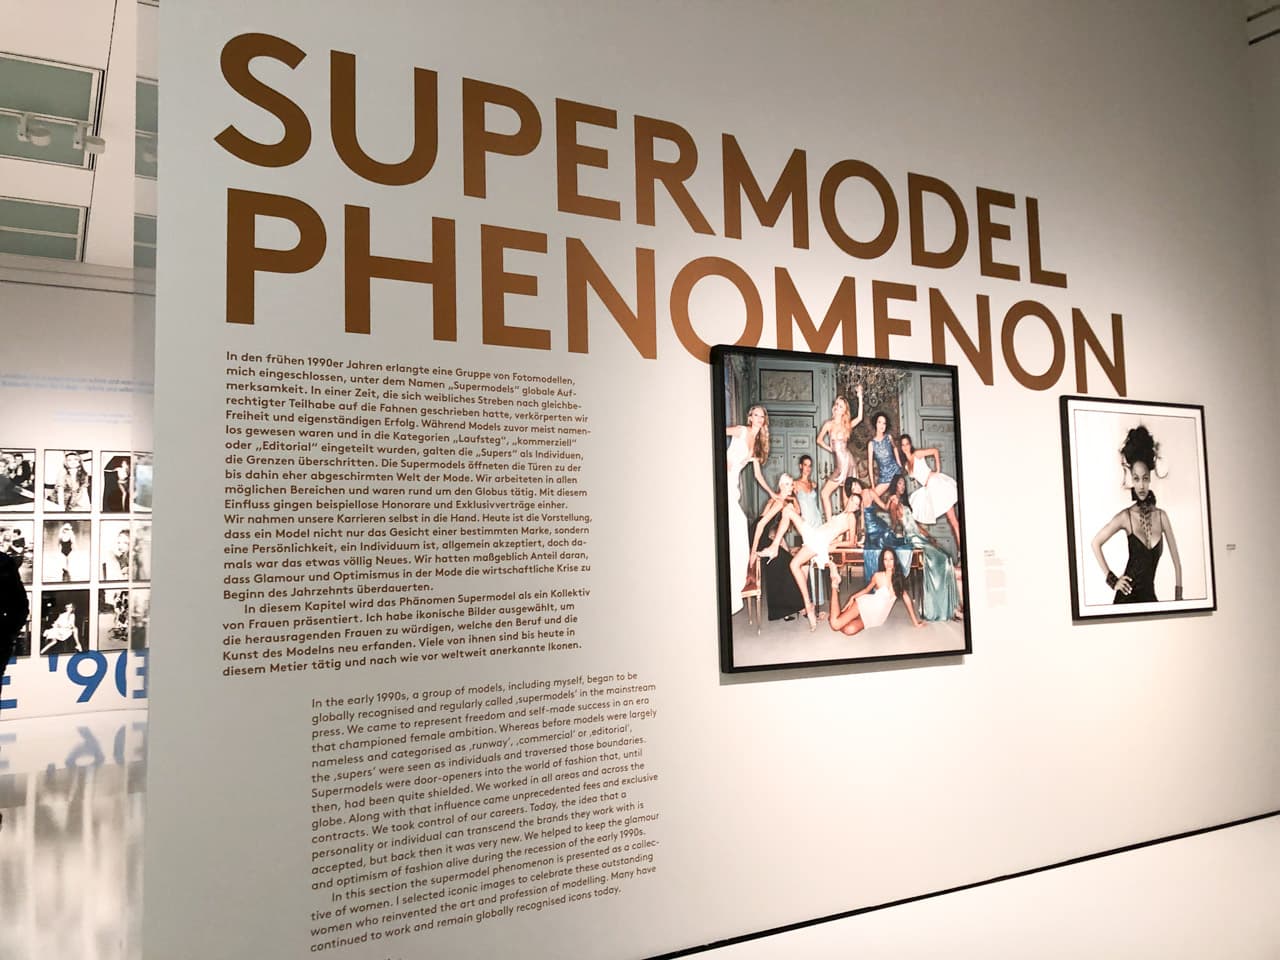 Wall with framed photos of supermodels and Supermodel Phenomenon written on it